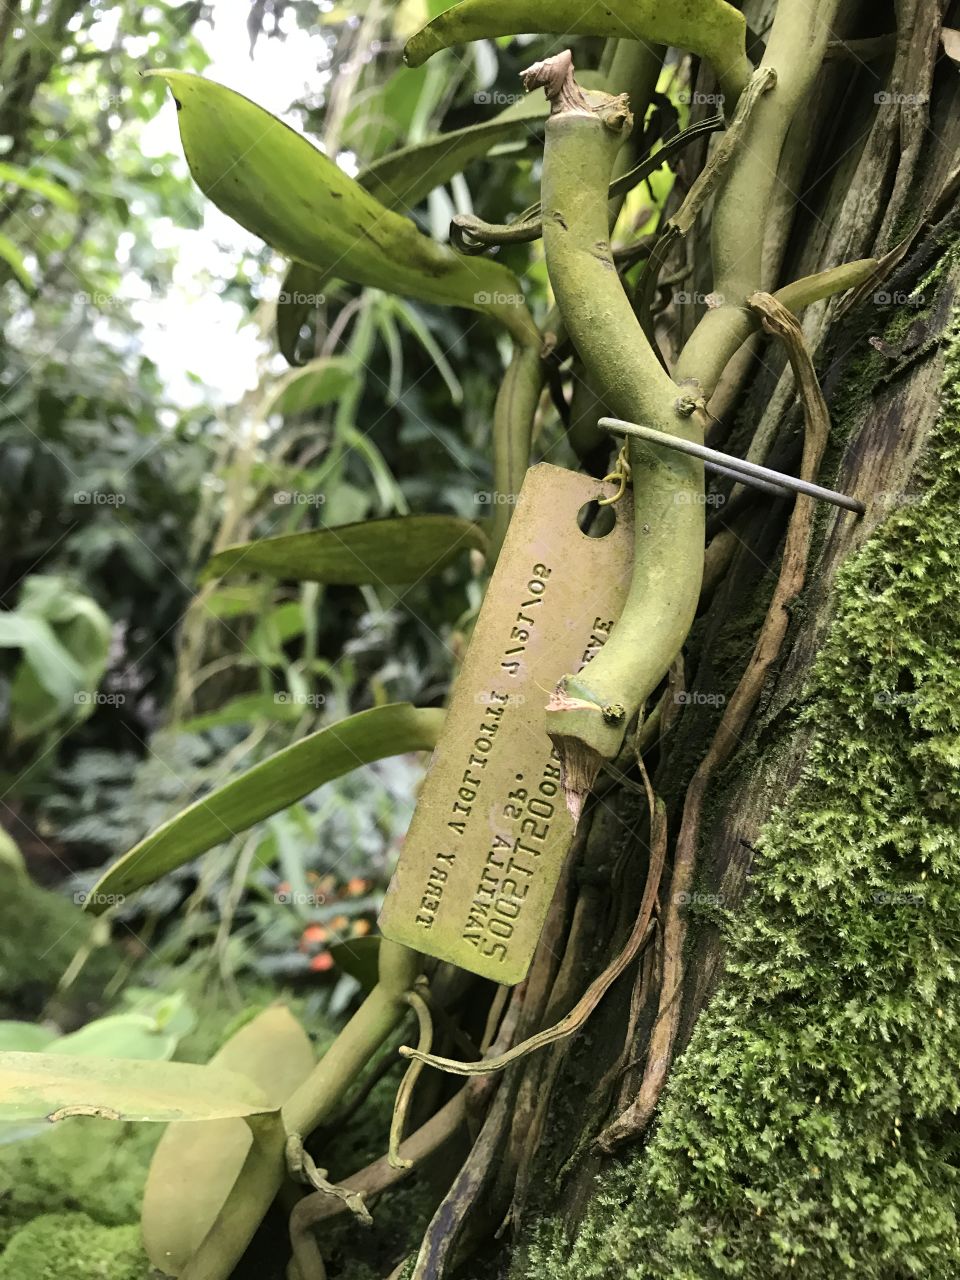 A vine with an identifying tag attached, surrounded by other plants